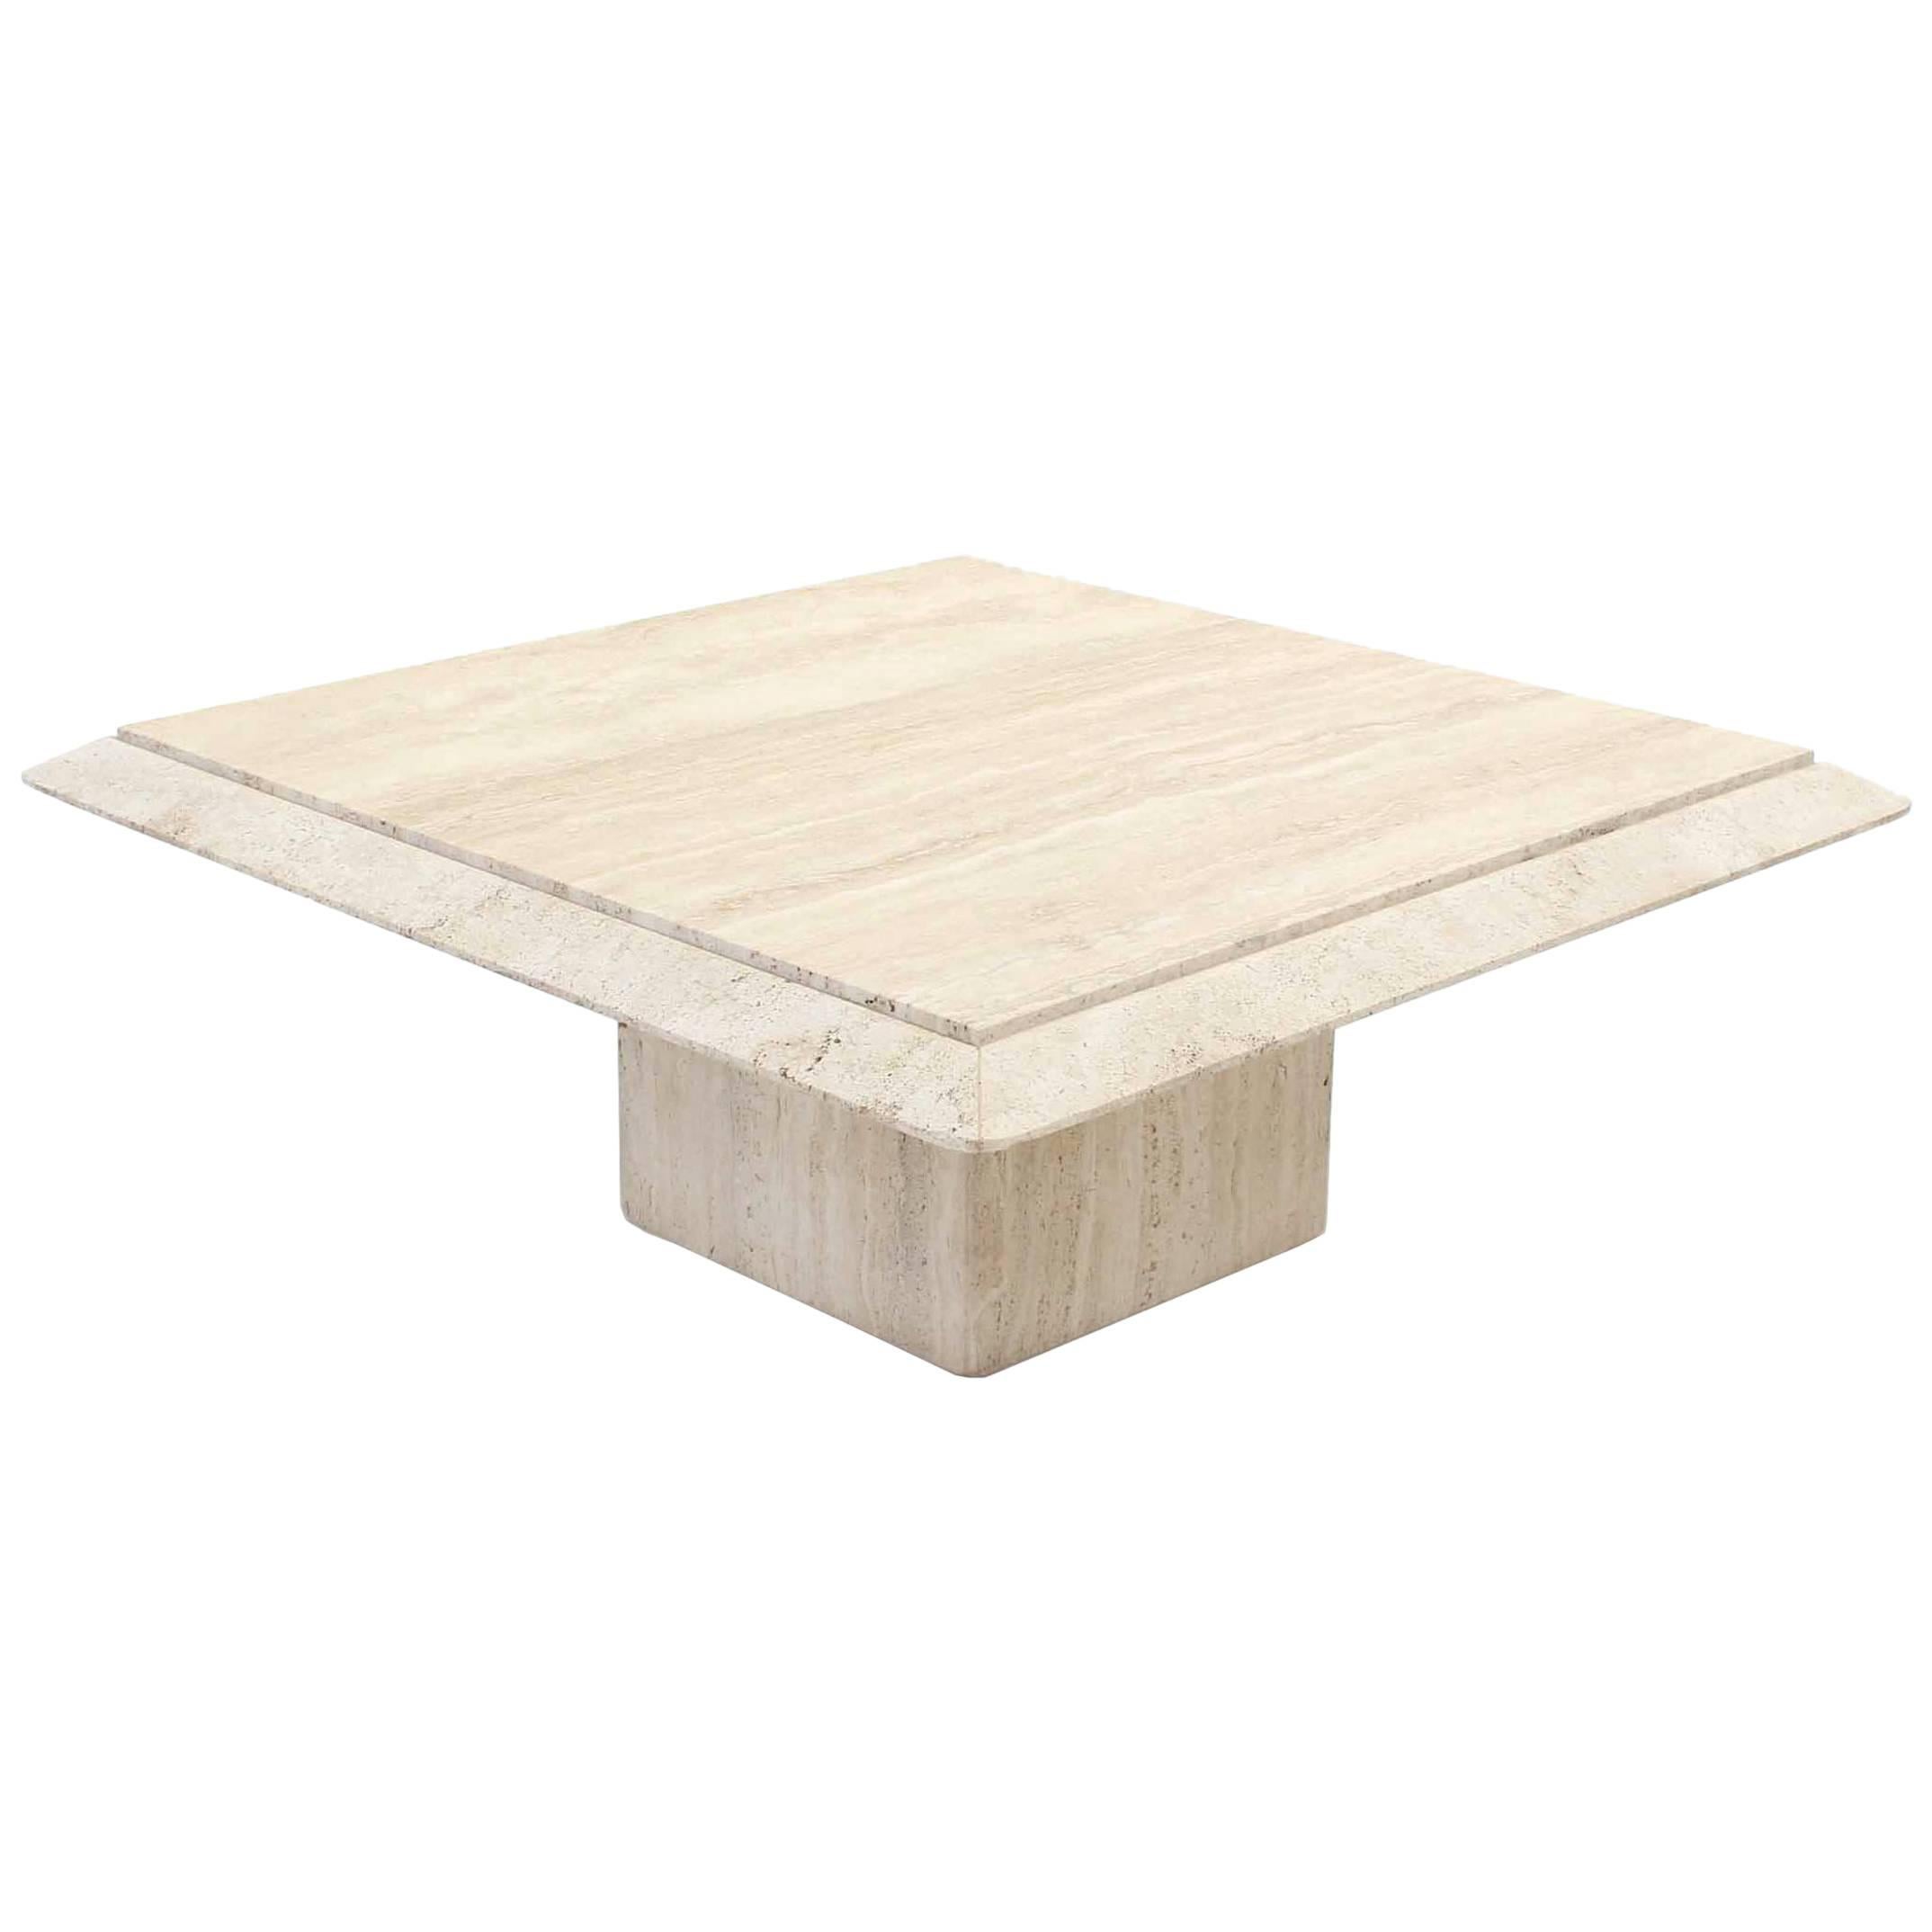 Square Travertine Base & Top Coffee Table